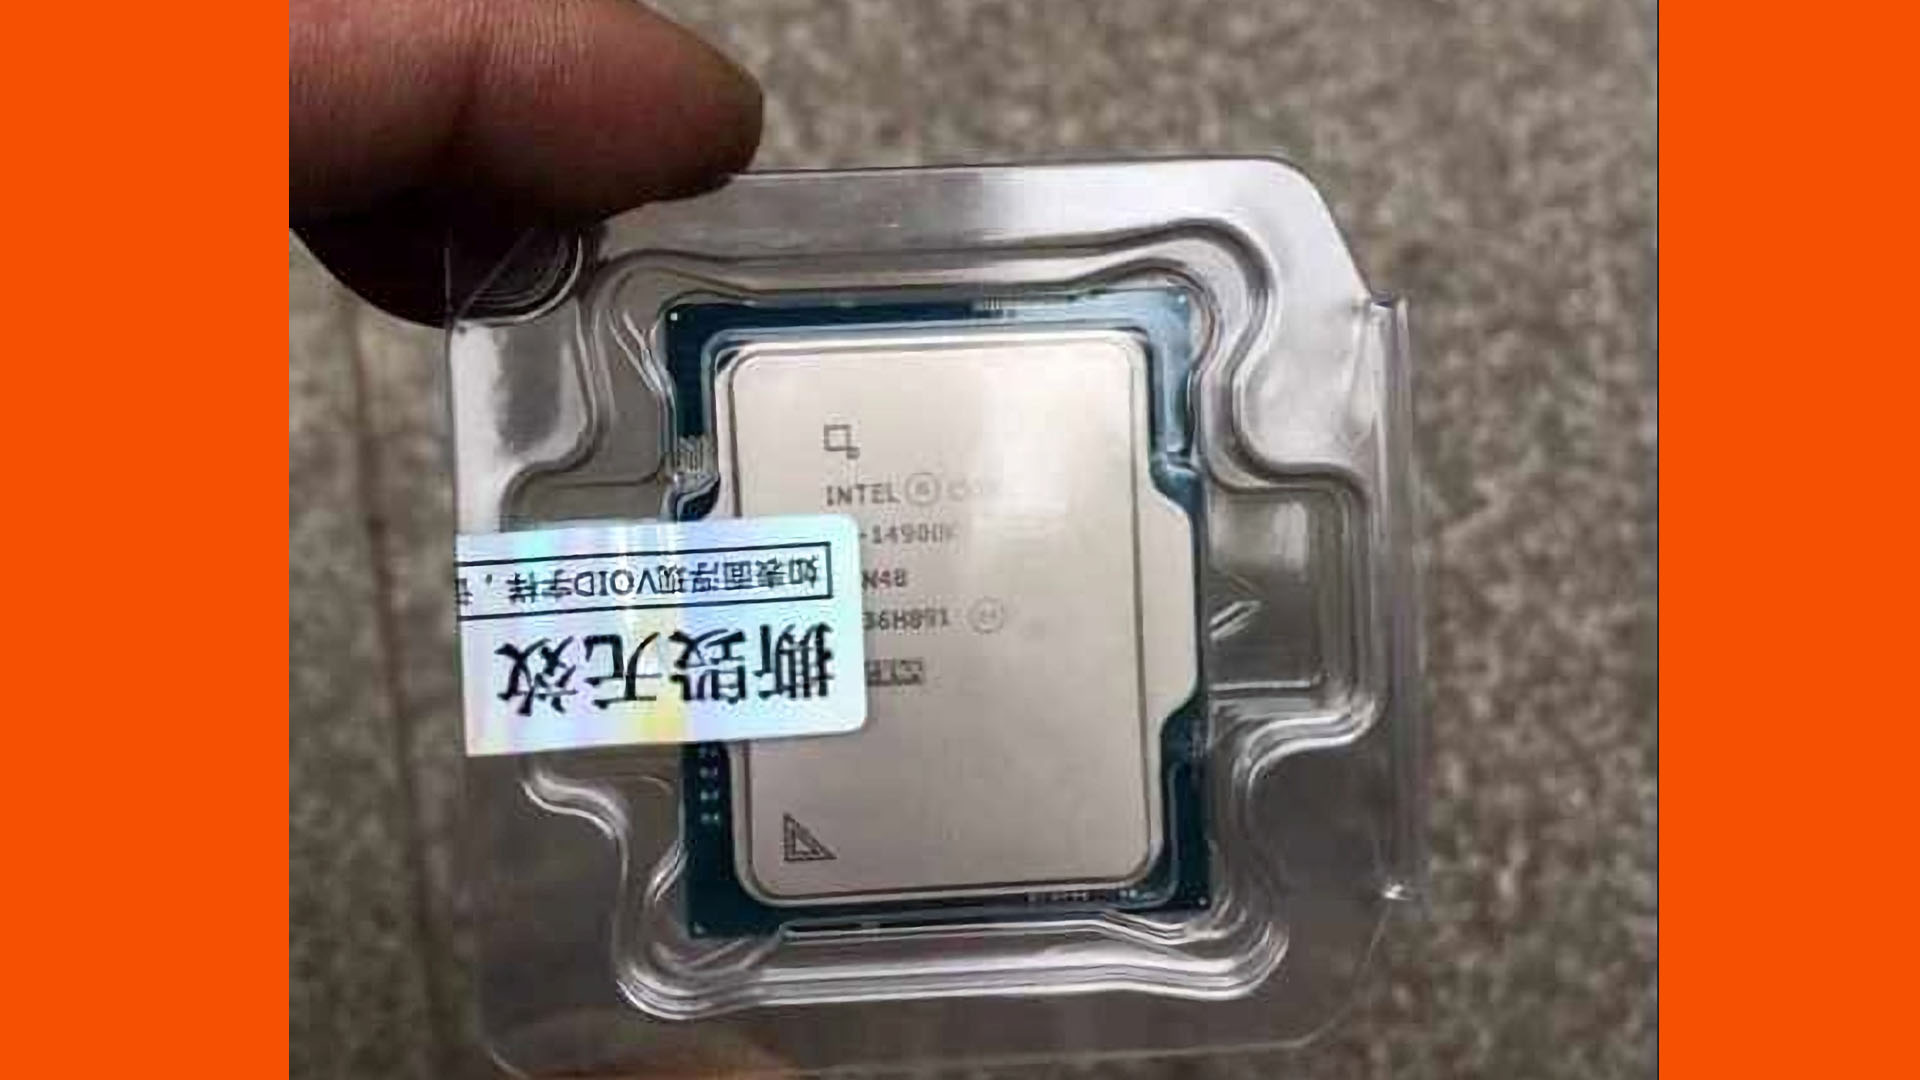 Watch out, there are fake Intel CPUs about